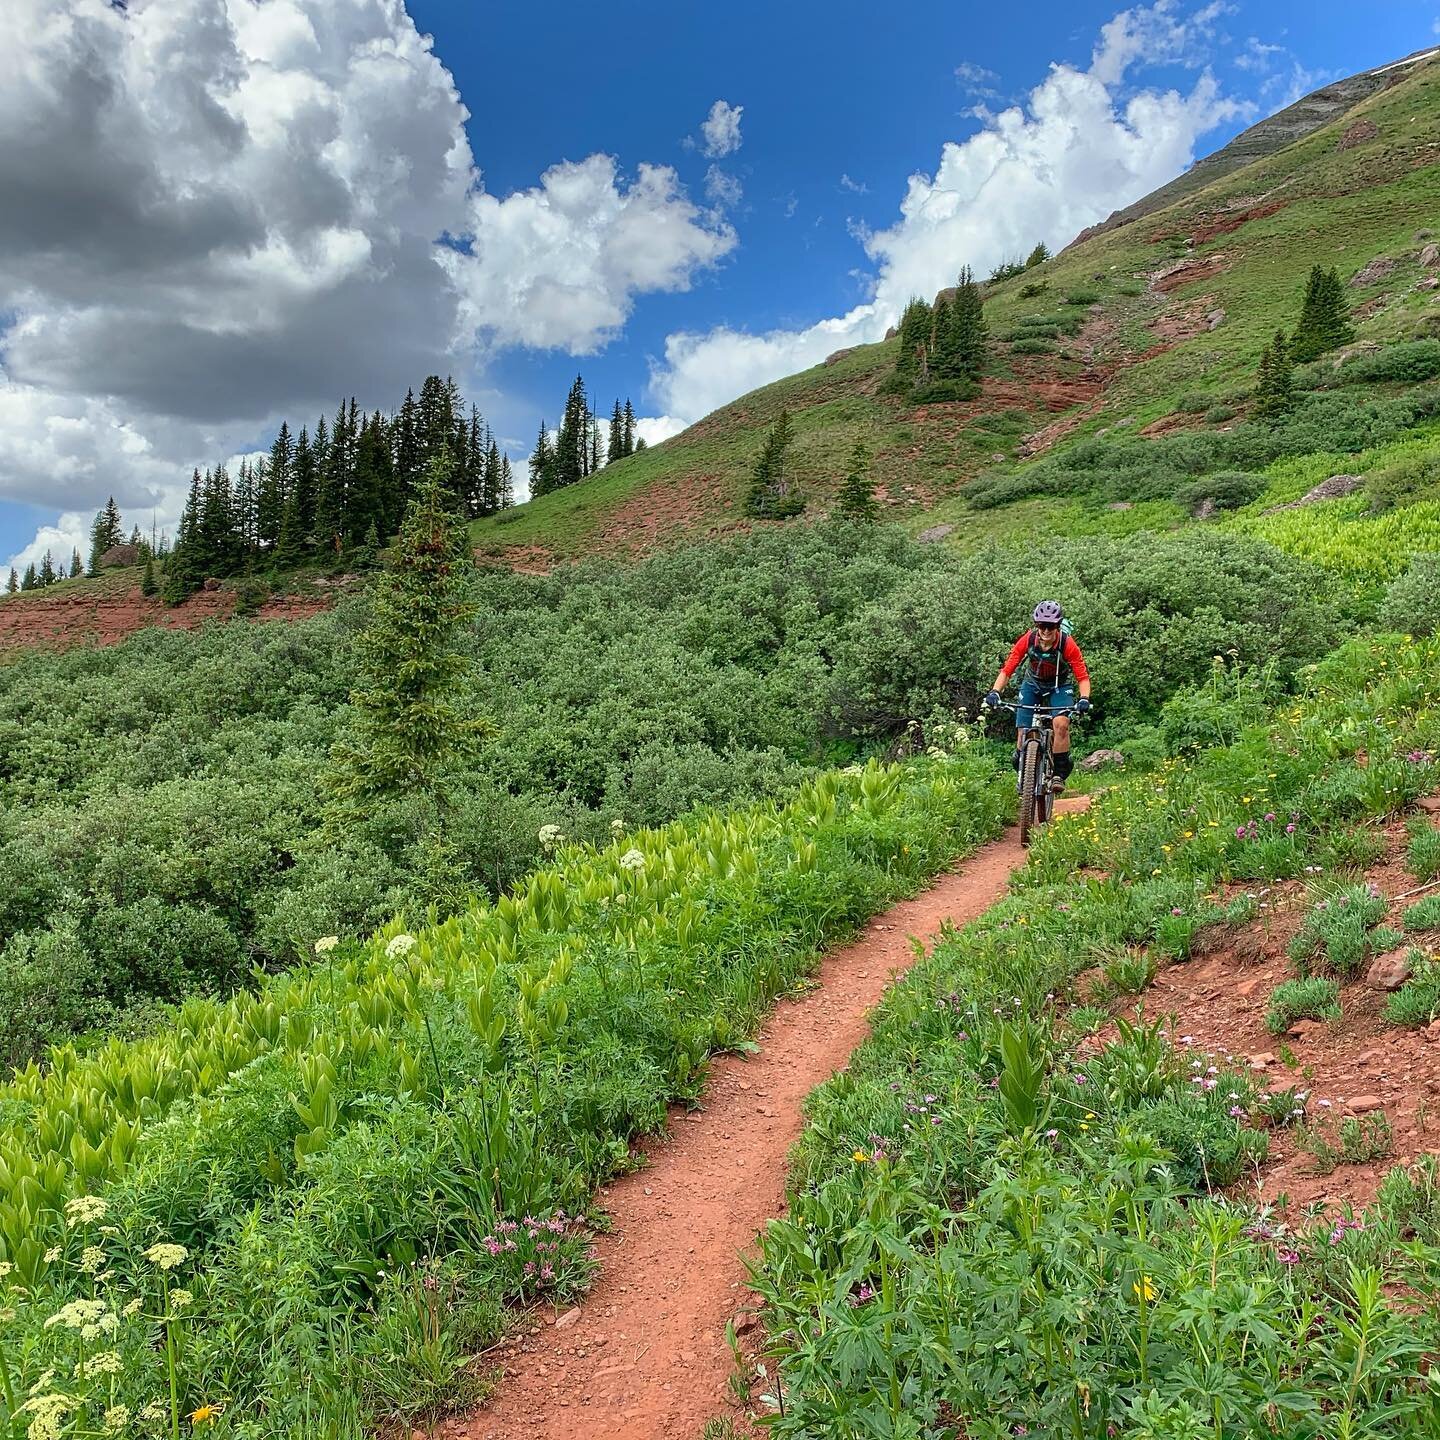 Who else LOVES to ride?! Let&rsquo;s keep the momentum going! Baker&rsquo;s Park will benefit Silverton and the surrounding region.

The goal of Baker&rsquo;s Park is to develop a progressive trail network of shared-use and bike-optimized trails that